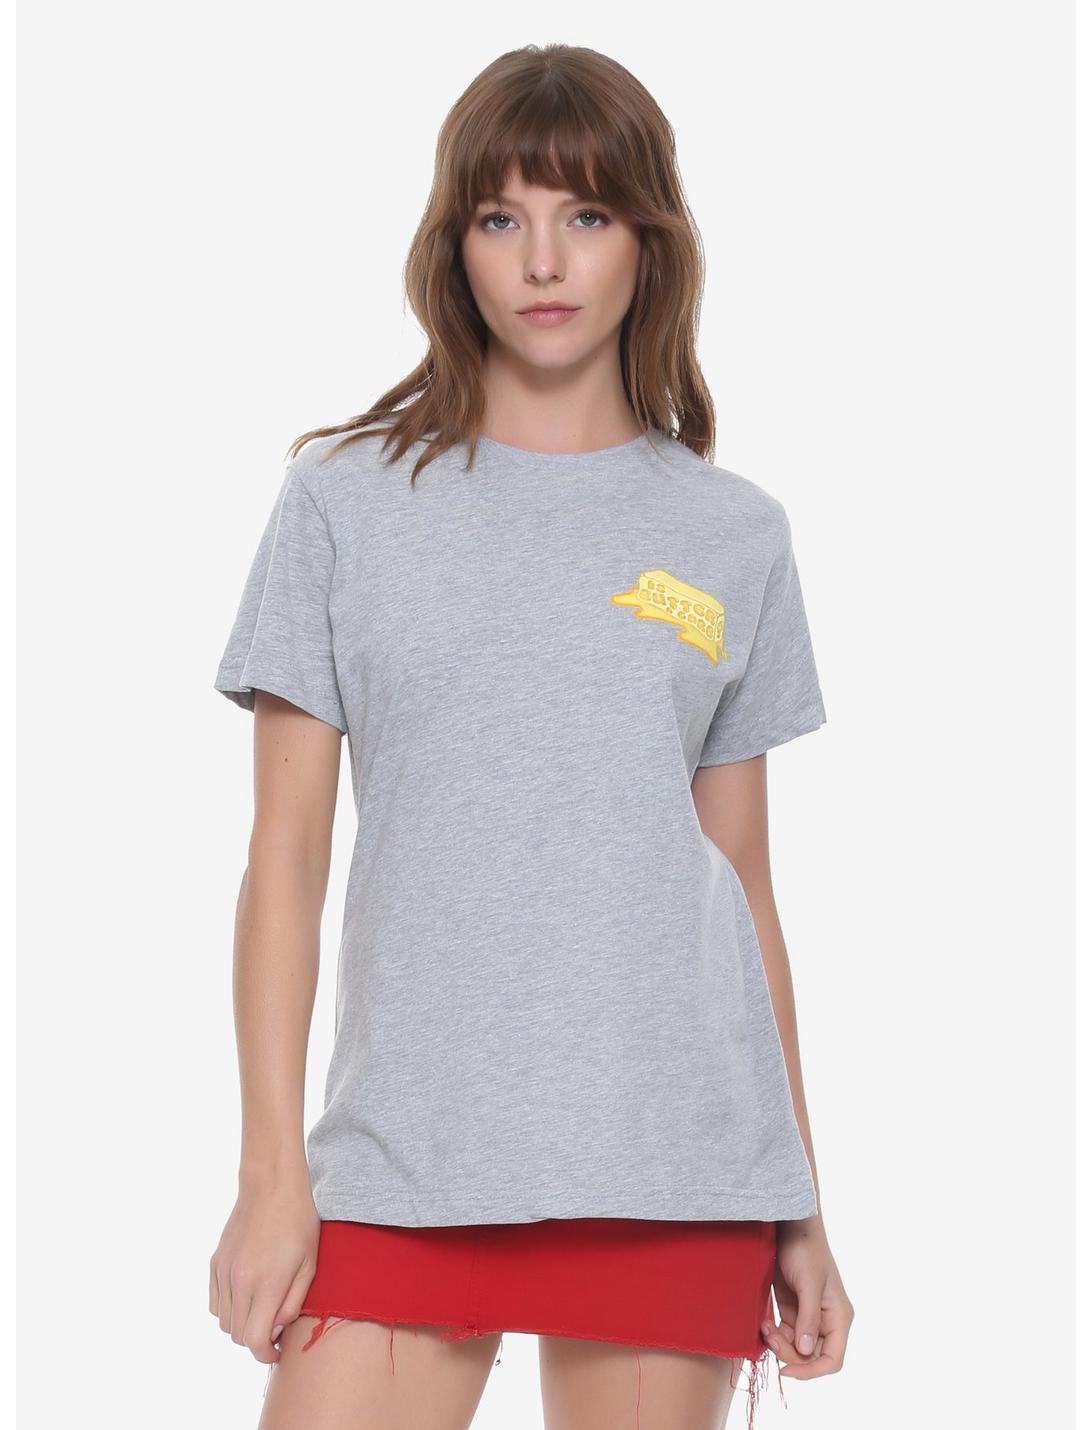 Means Girls Butter Womens Tee - BoxLunch Exclusive , GREY, hi-res